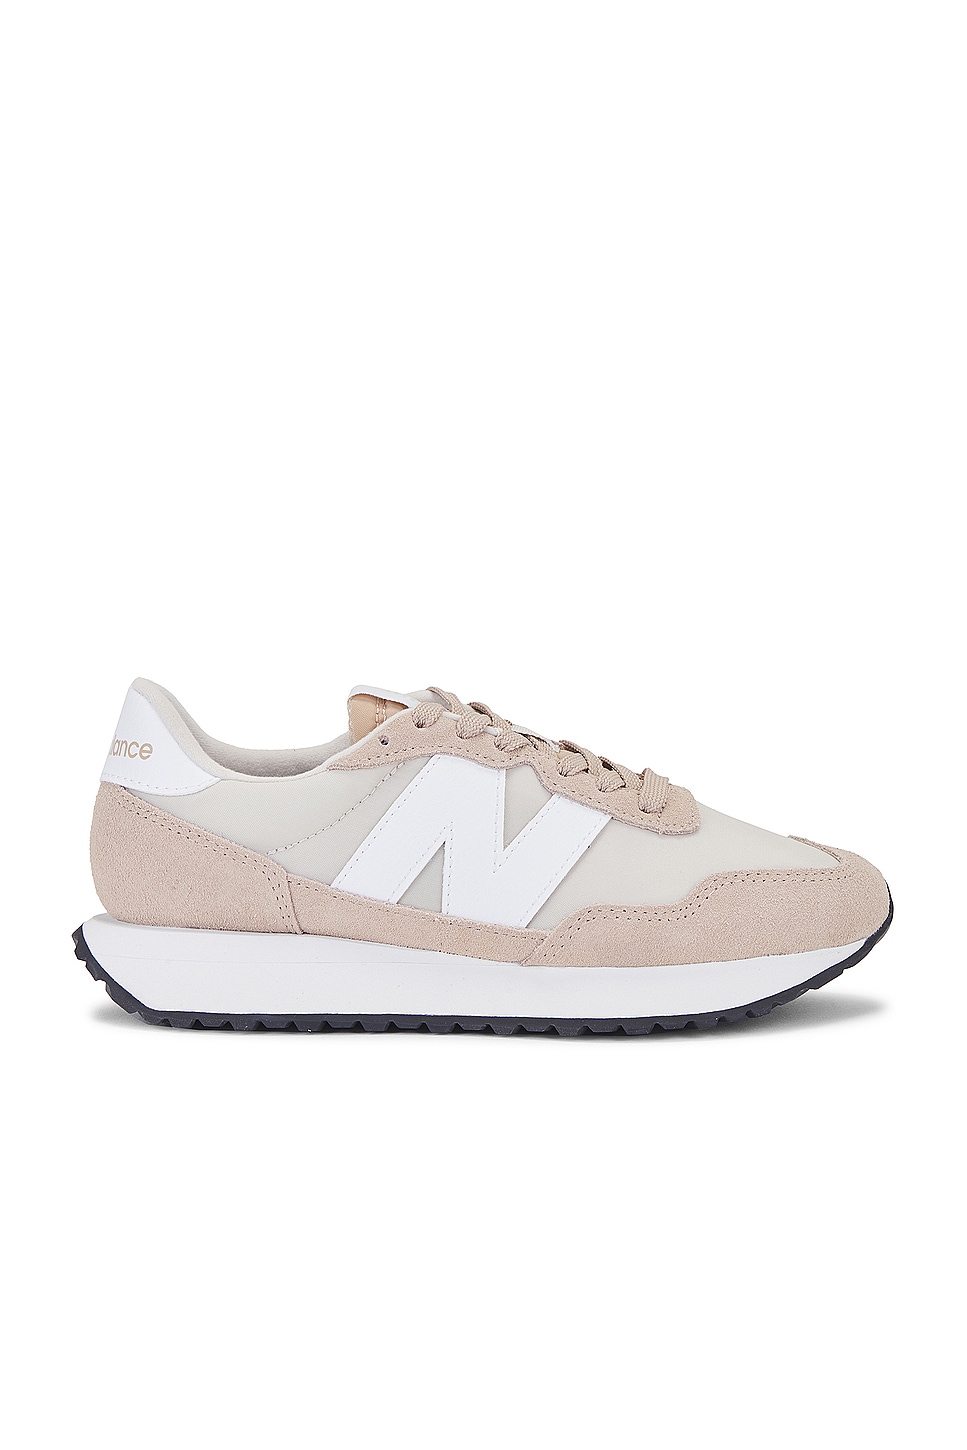 Image 1 of New Balance 237 Sneaker in Mindful Grey & White